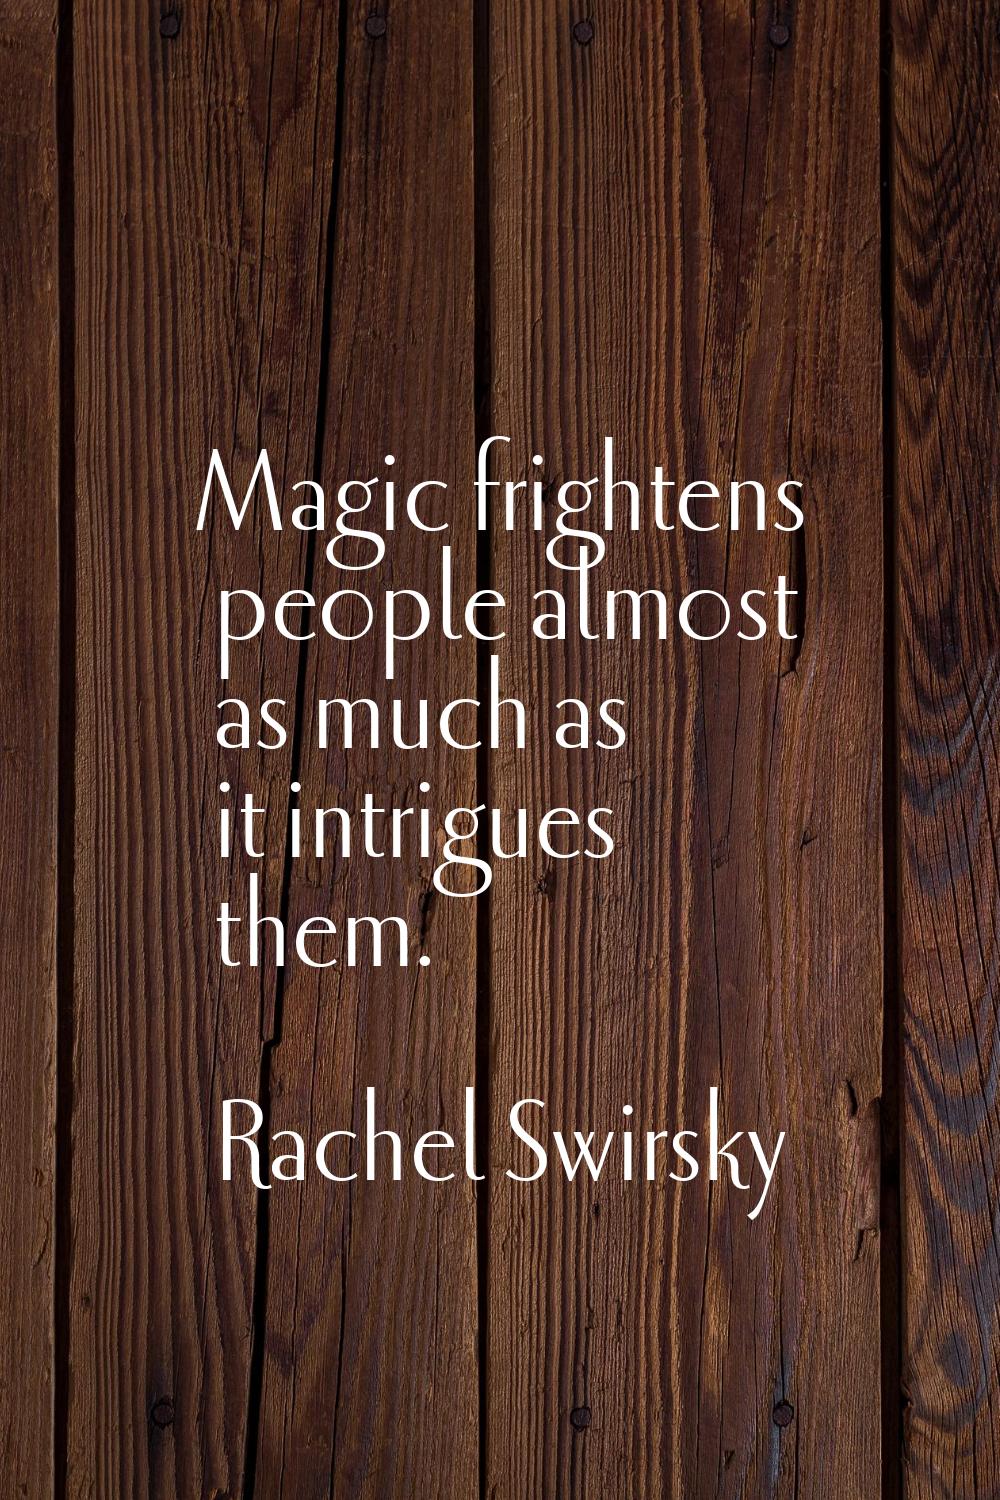 Magic frightens people almost as much as it intrigues them.